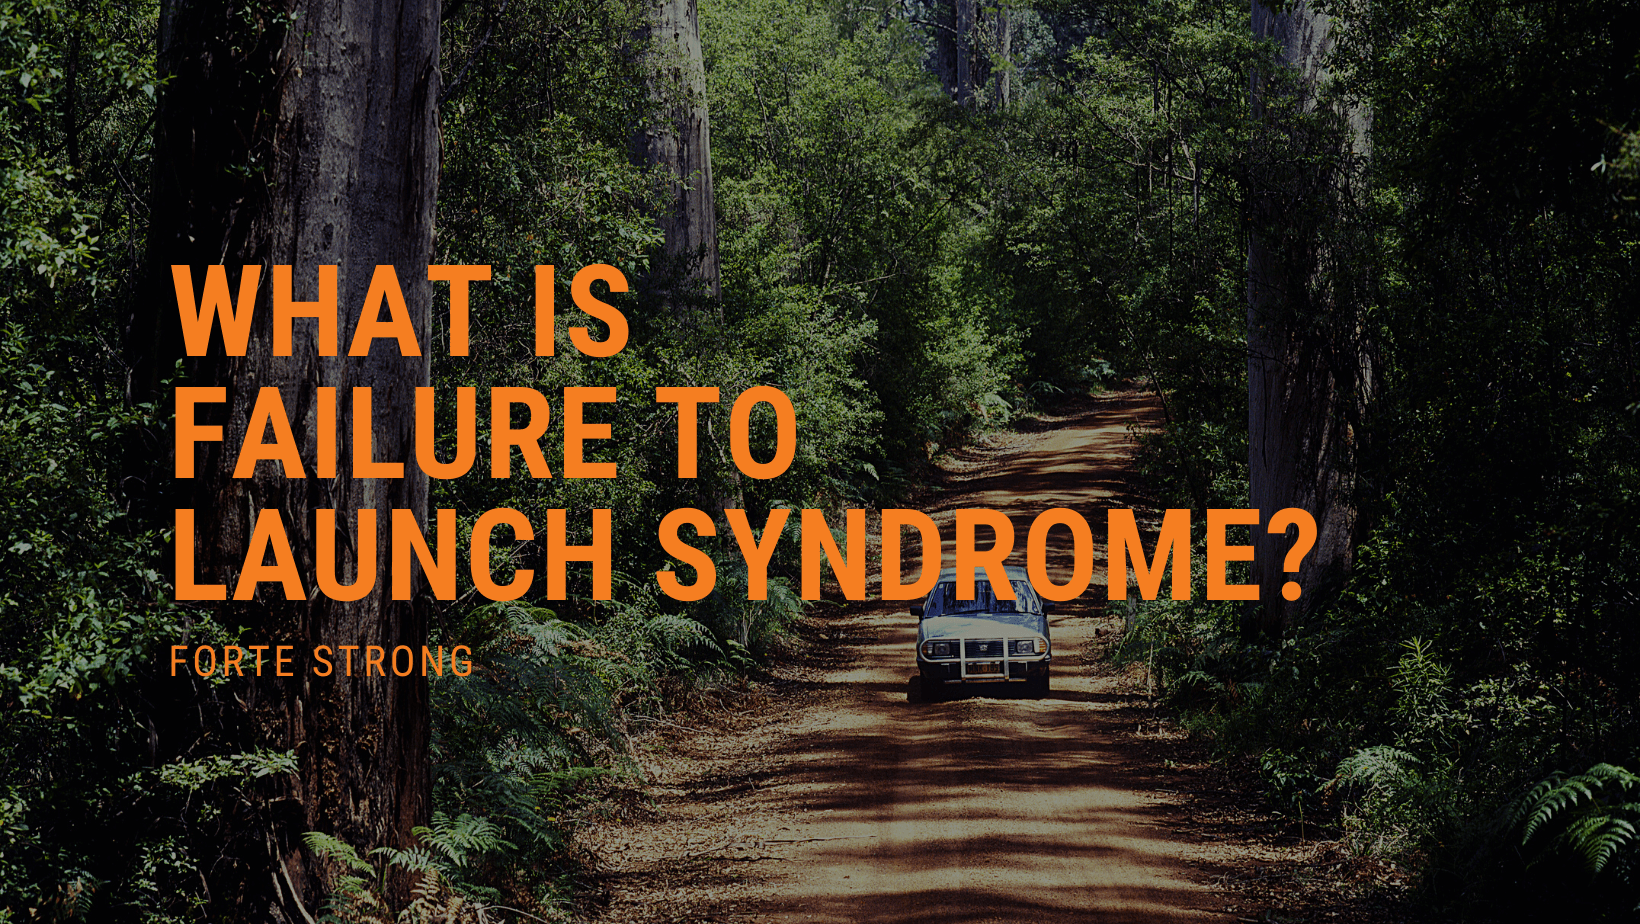 What is Failure to Launch Syndrome?